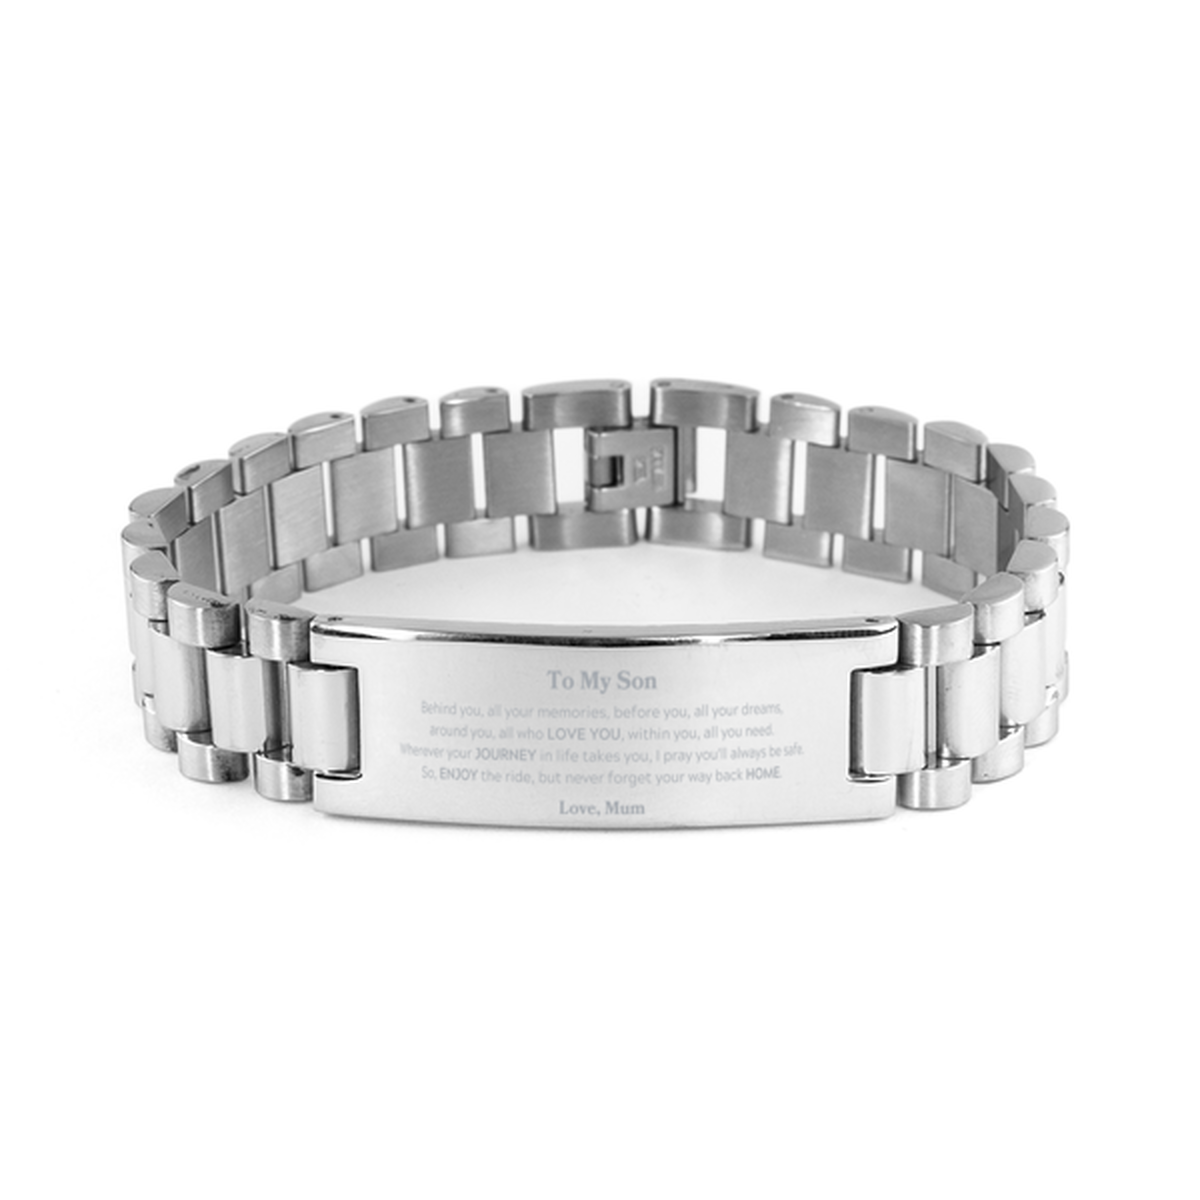 To My Son Graduation Gifts from Mum, Son Ladder Stainless Steel Bracelet Christmas Birthday Gifts for Son Behind you, all your memories, before you, all your dreams. Love, Mum